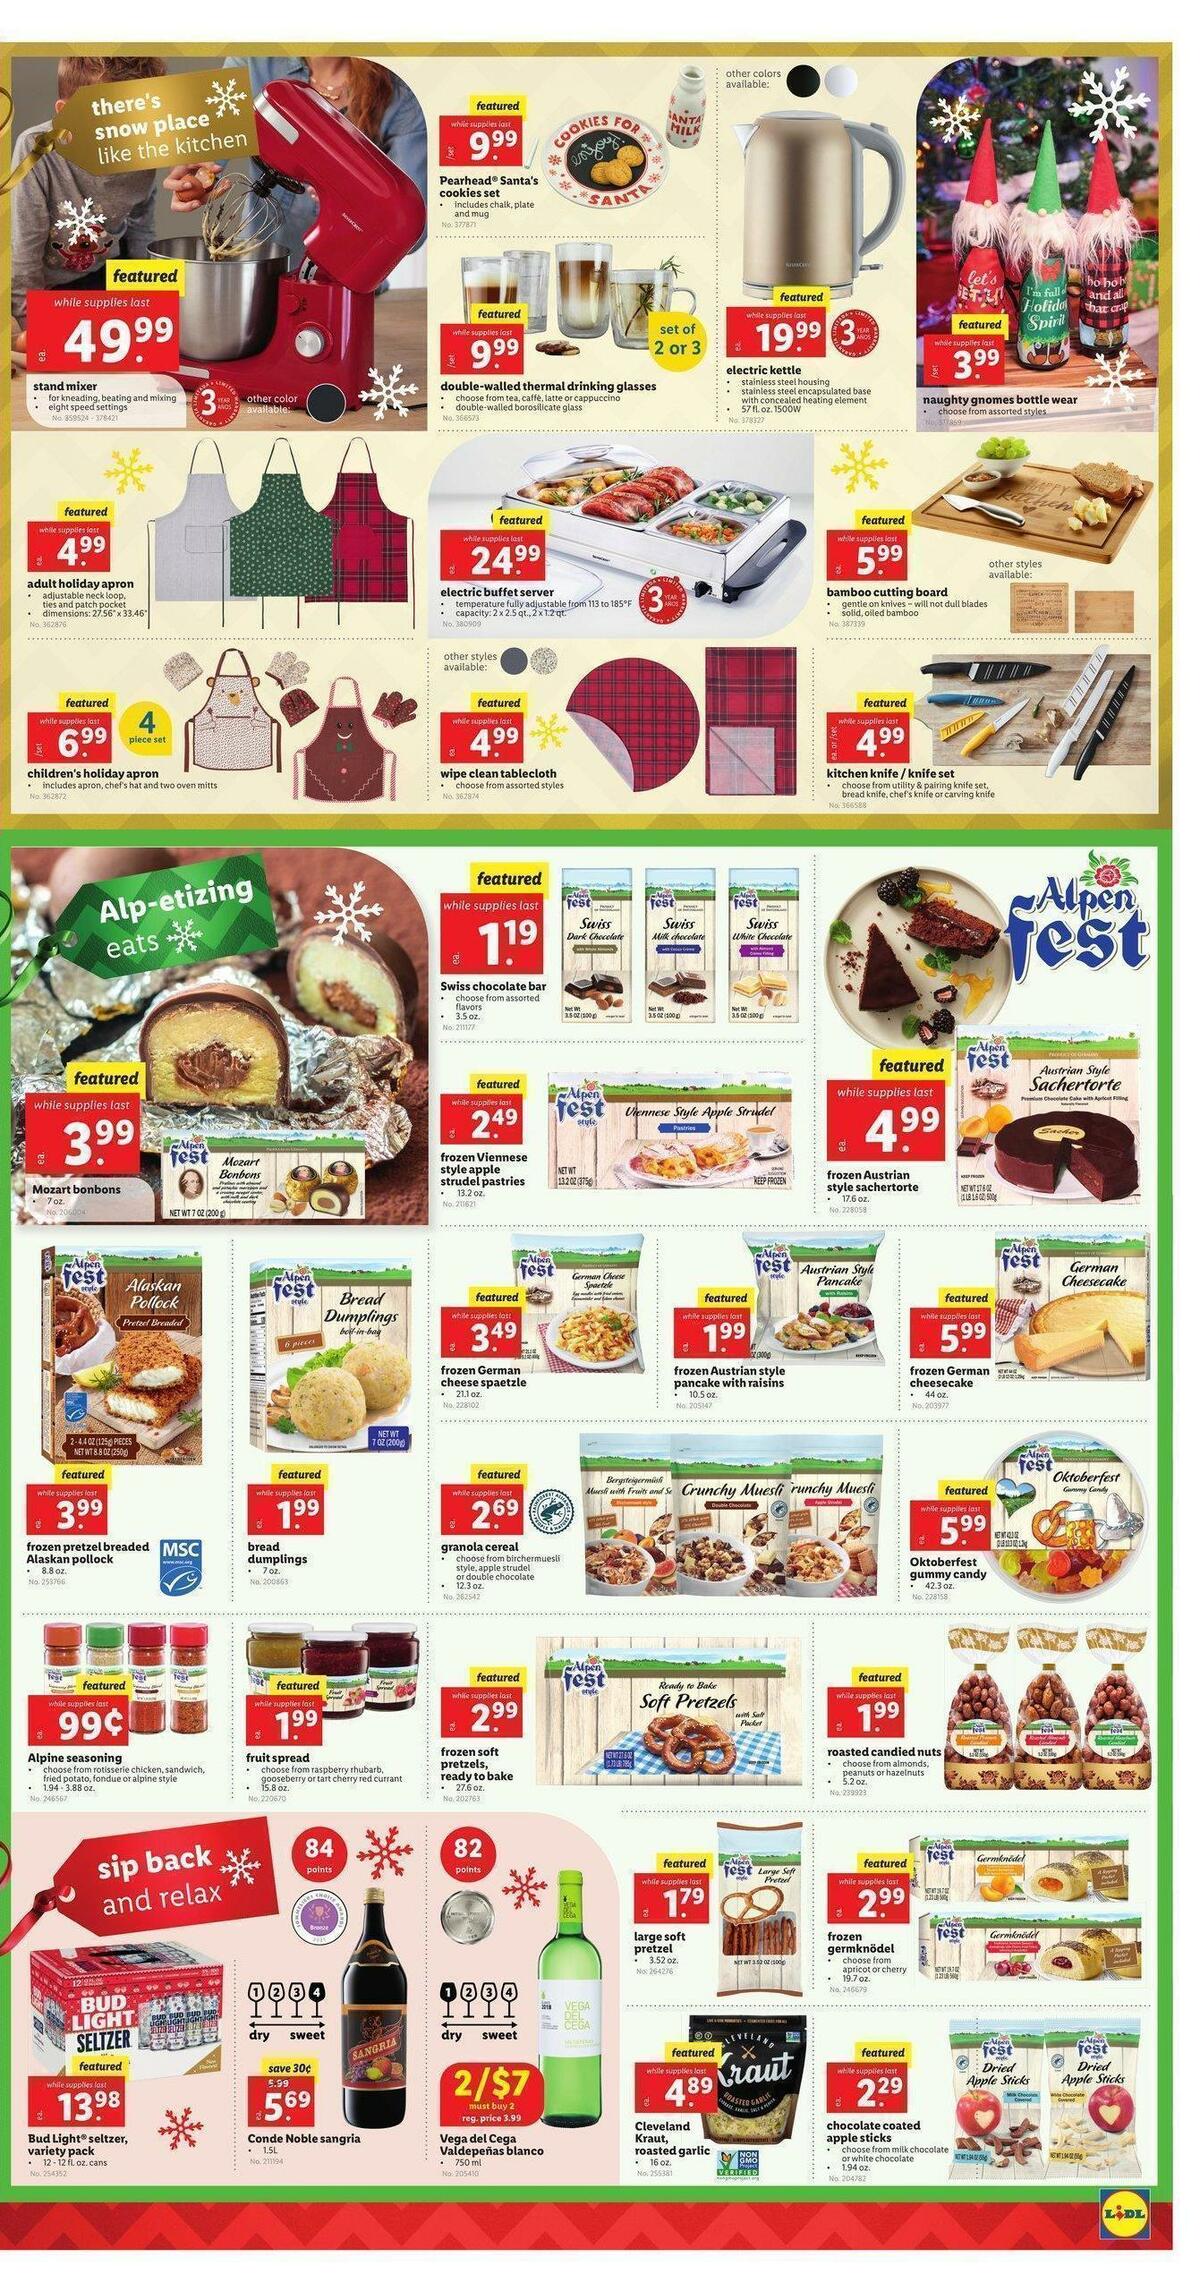 LIDL Weekly Ad from December 1